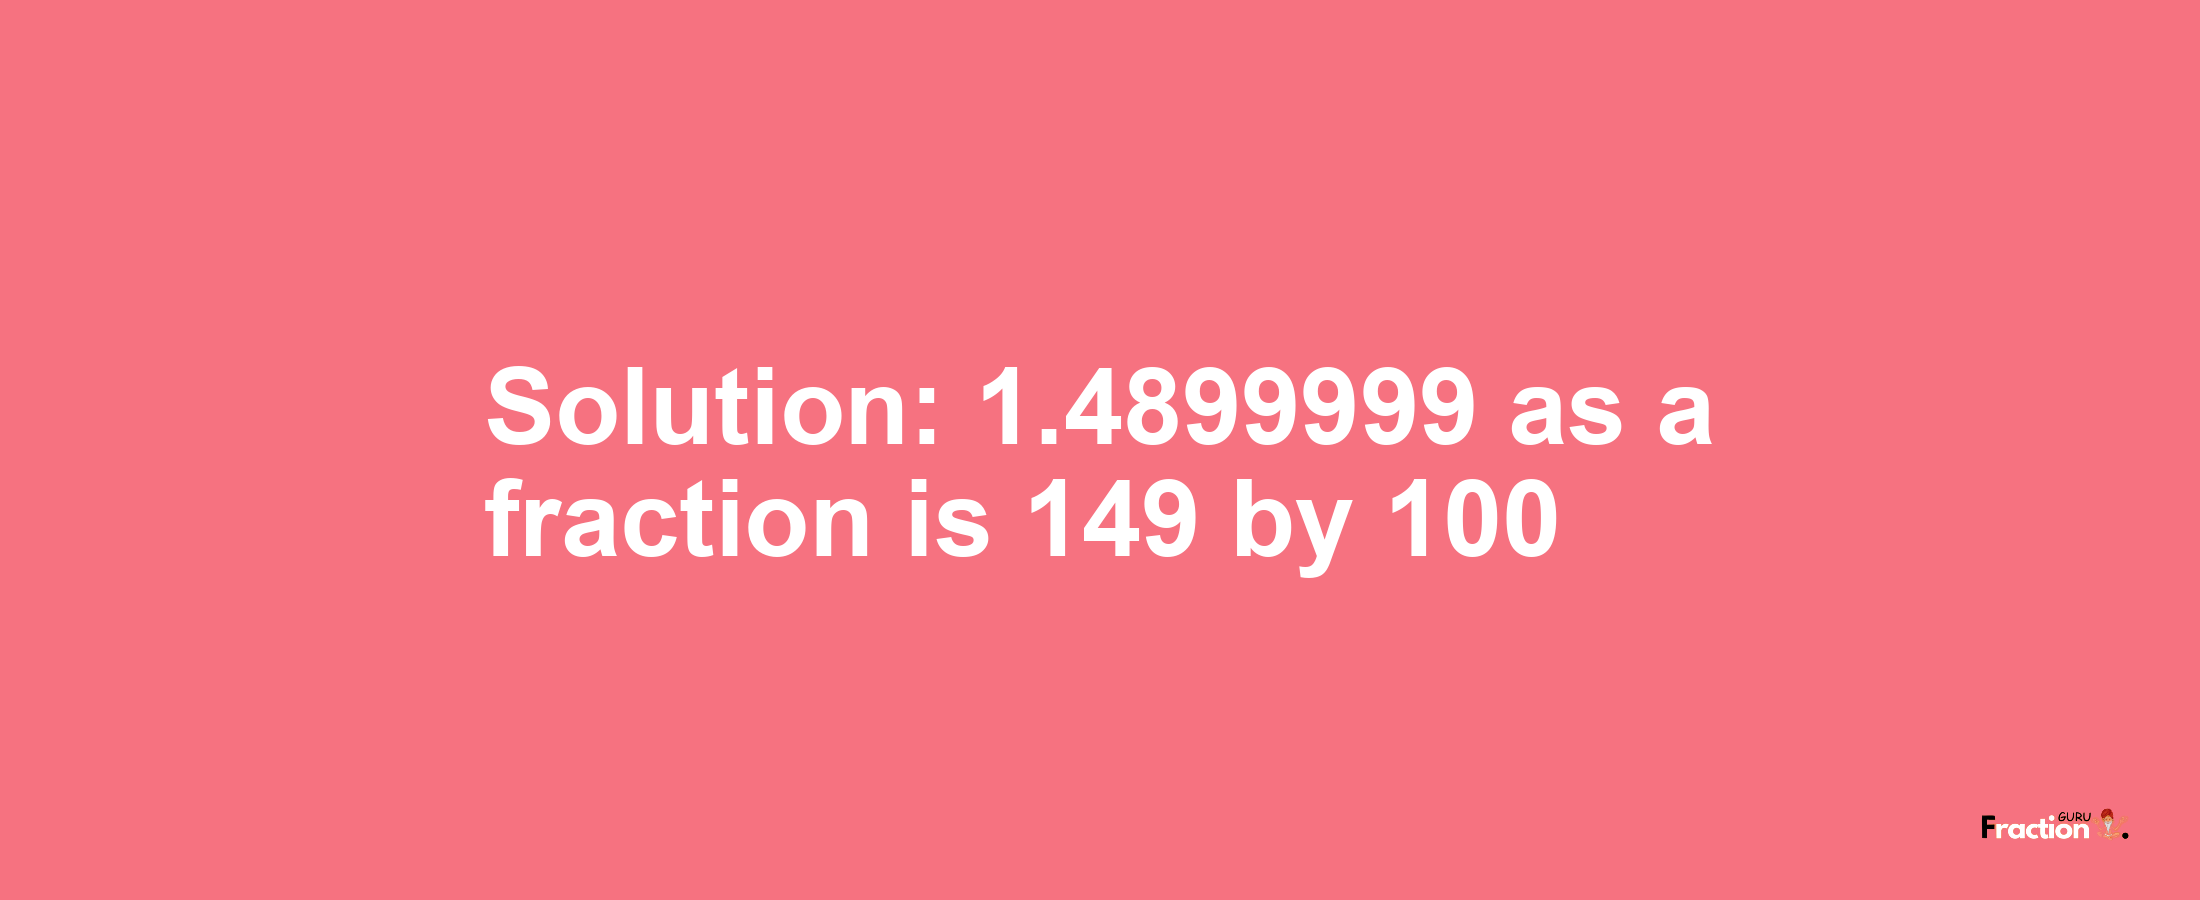 Solution:1.4899999 as a fraction is 149/100